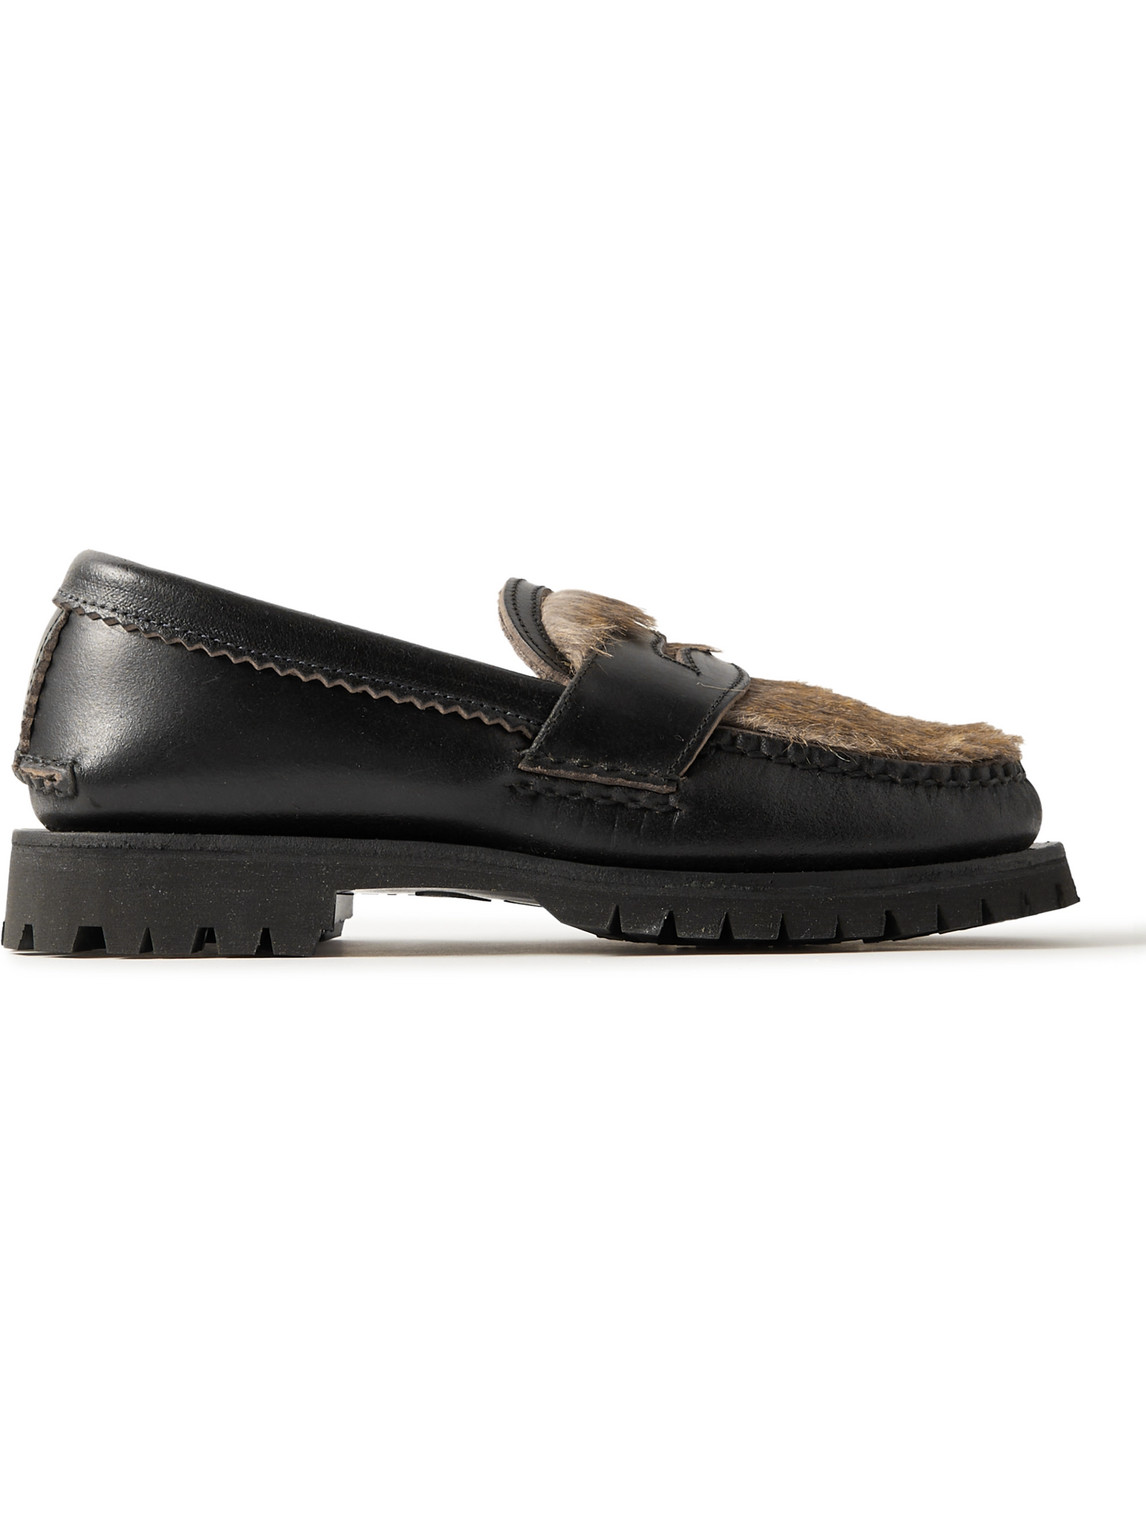 Leather and Faux Fur Penny Loafers